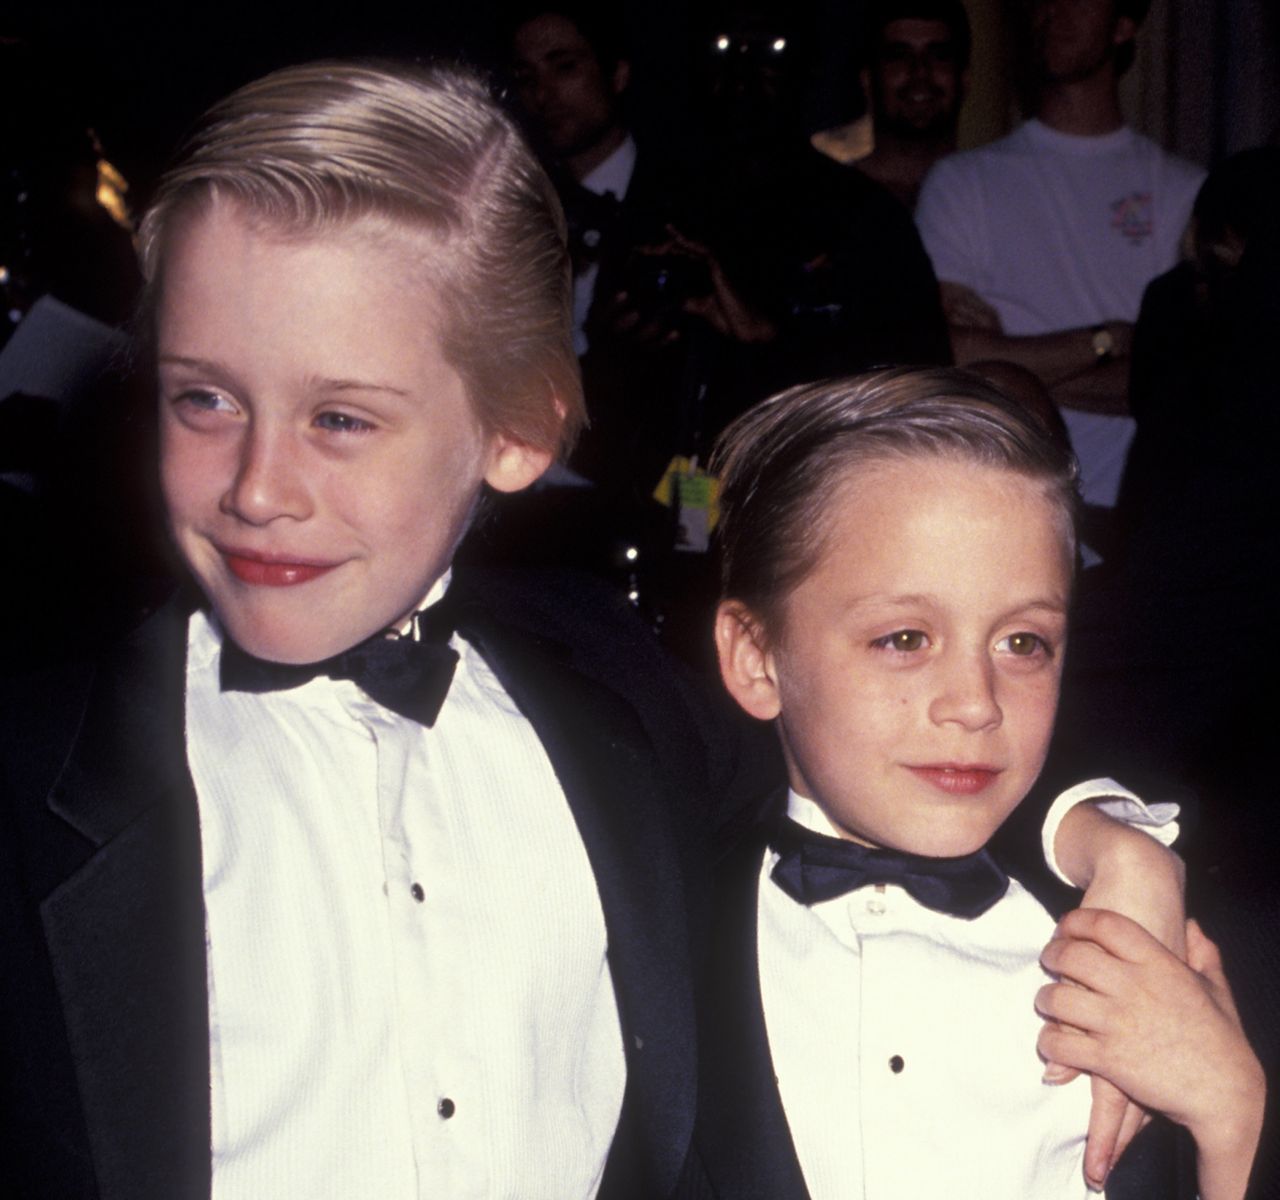 Macaulay and Kieran Culkin at the fifth annual American Comedy Awards back in 1991, just months after the release of the blockbuster hit "Home Alone."